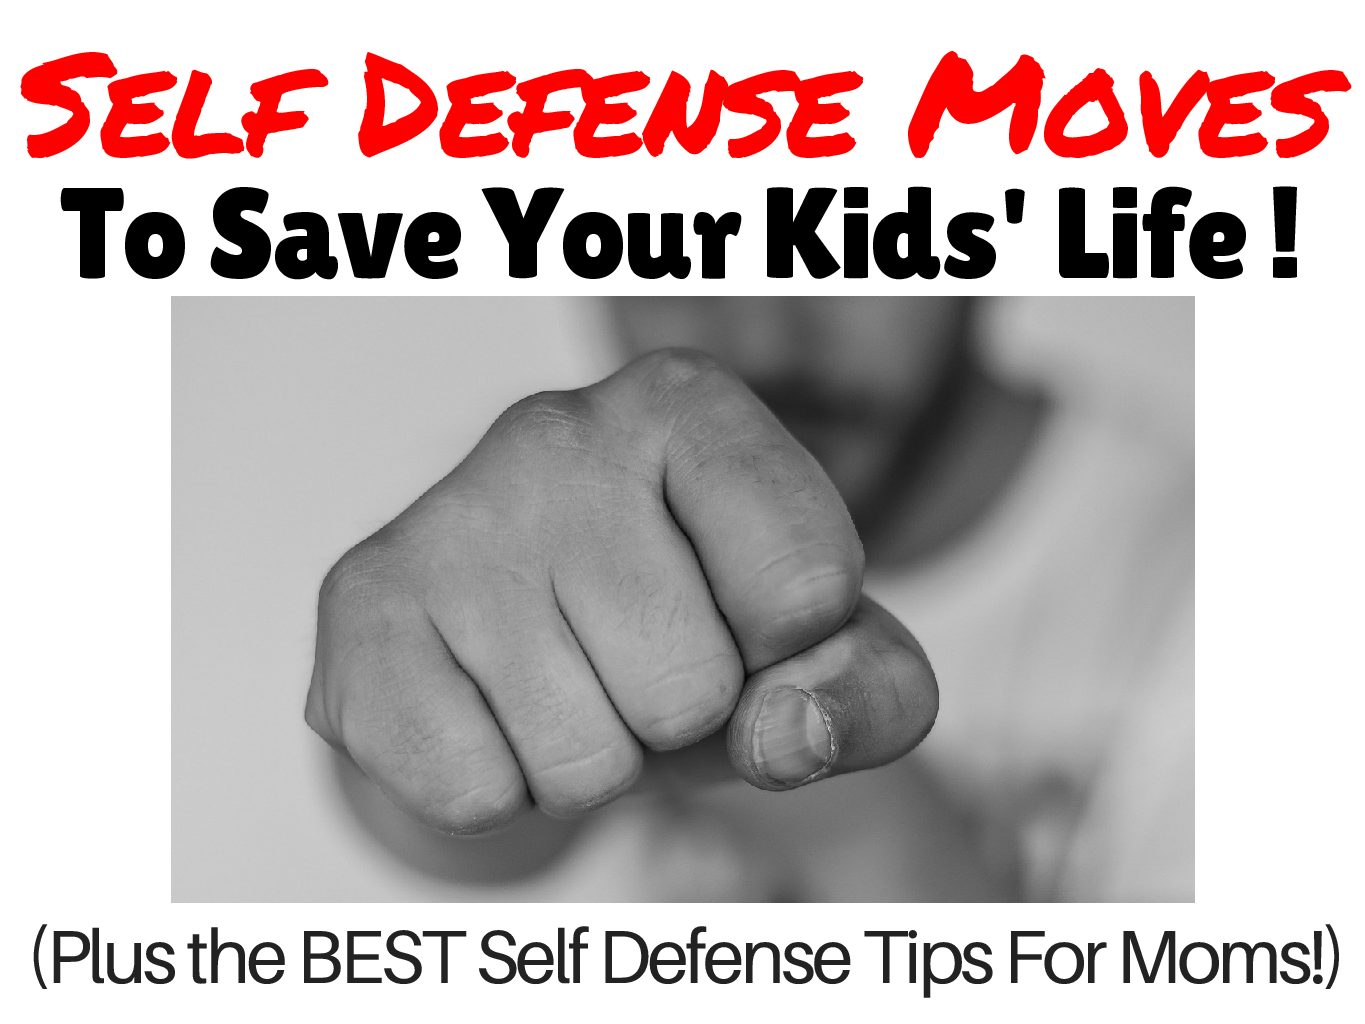 Self Defense Moves To Save Your Kids’ Life